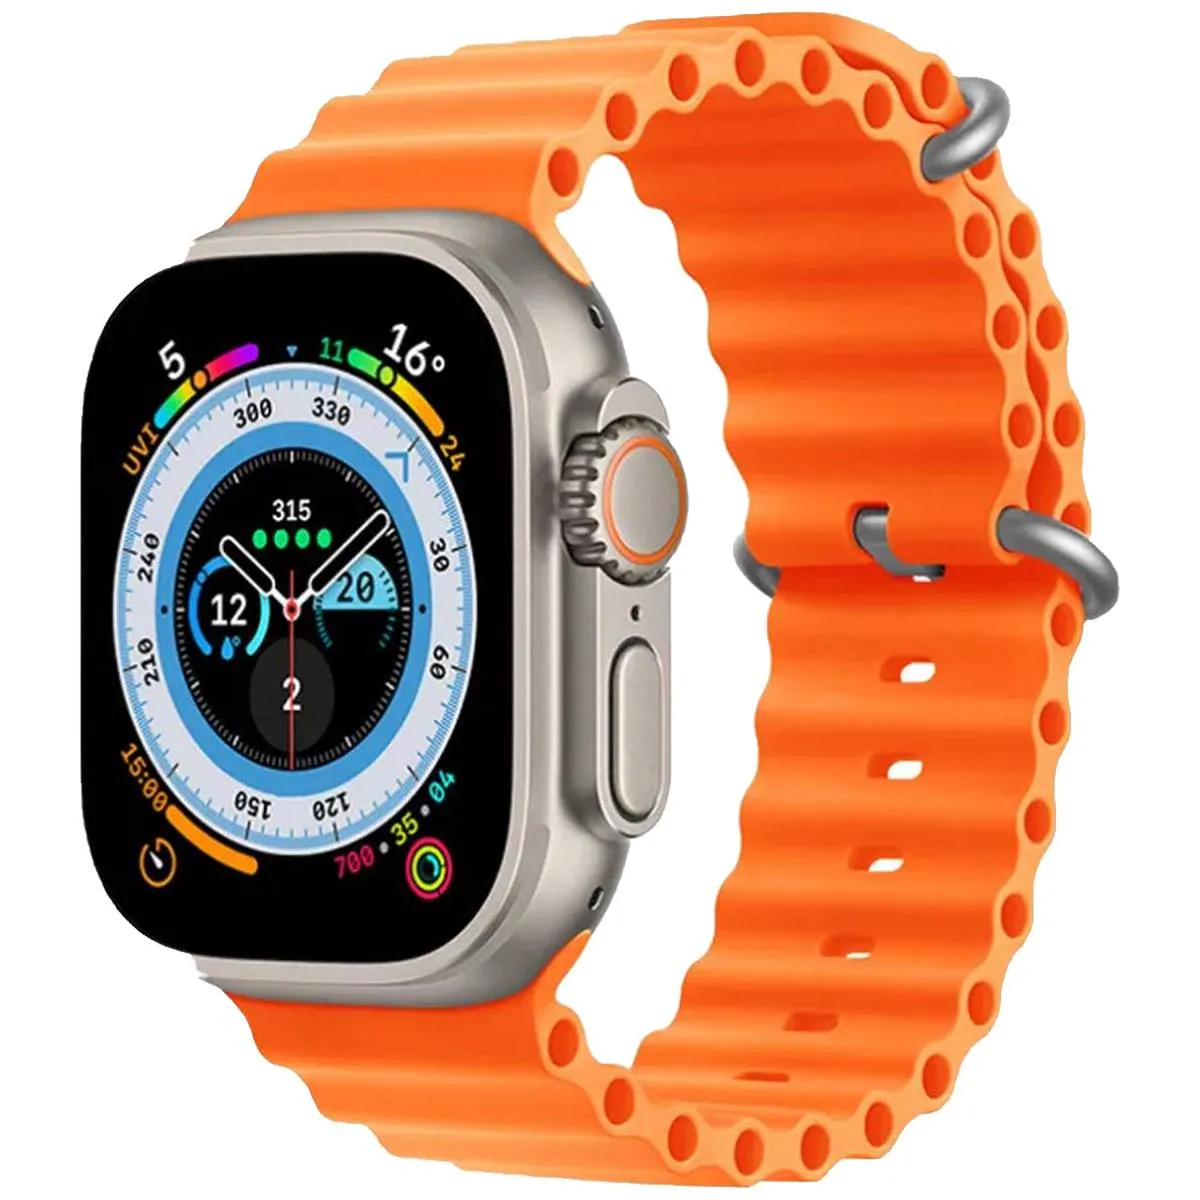 Buy Digital Watch Y80 Ultra Smart Watch available in Rhizmall at best price in Pakistan